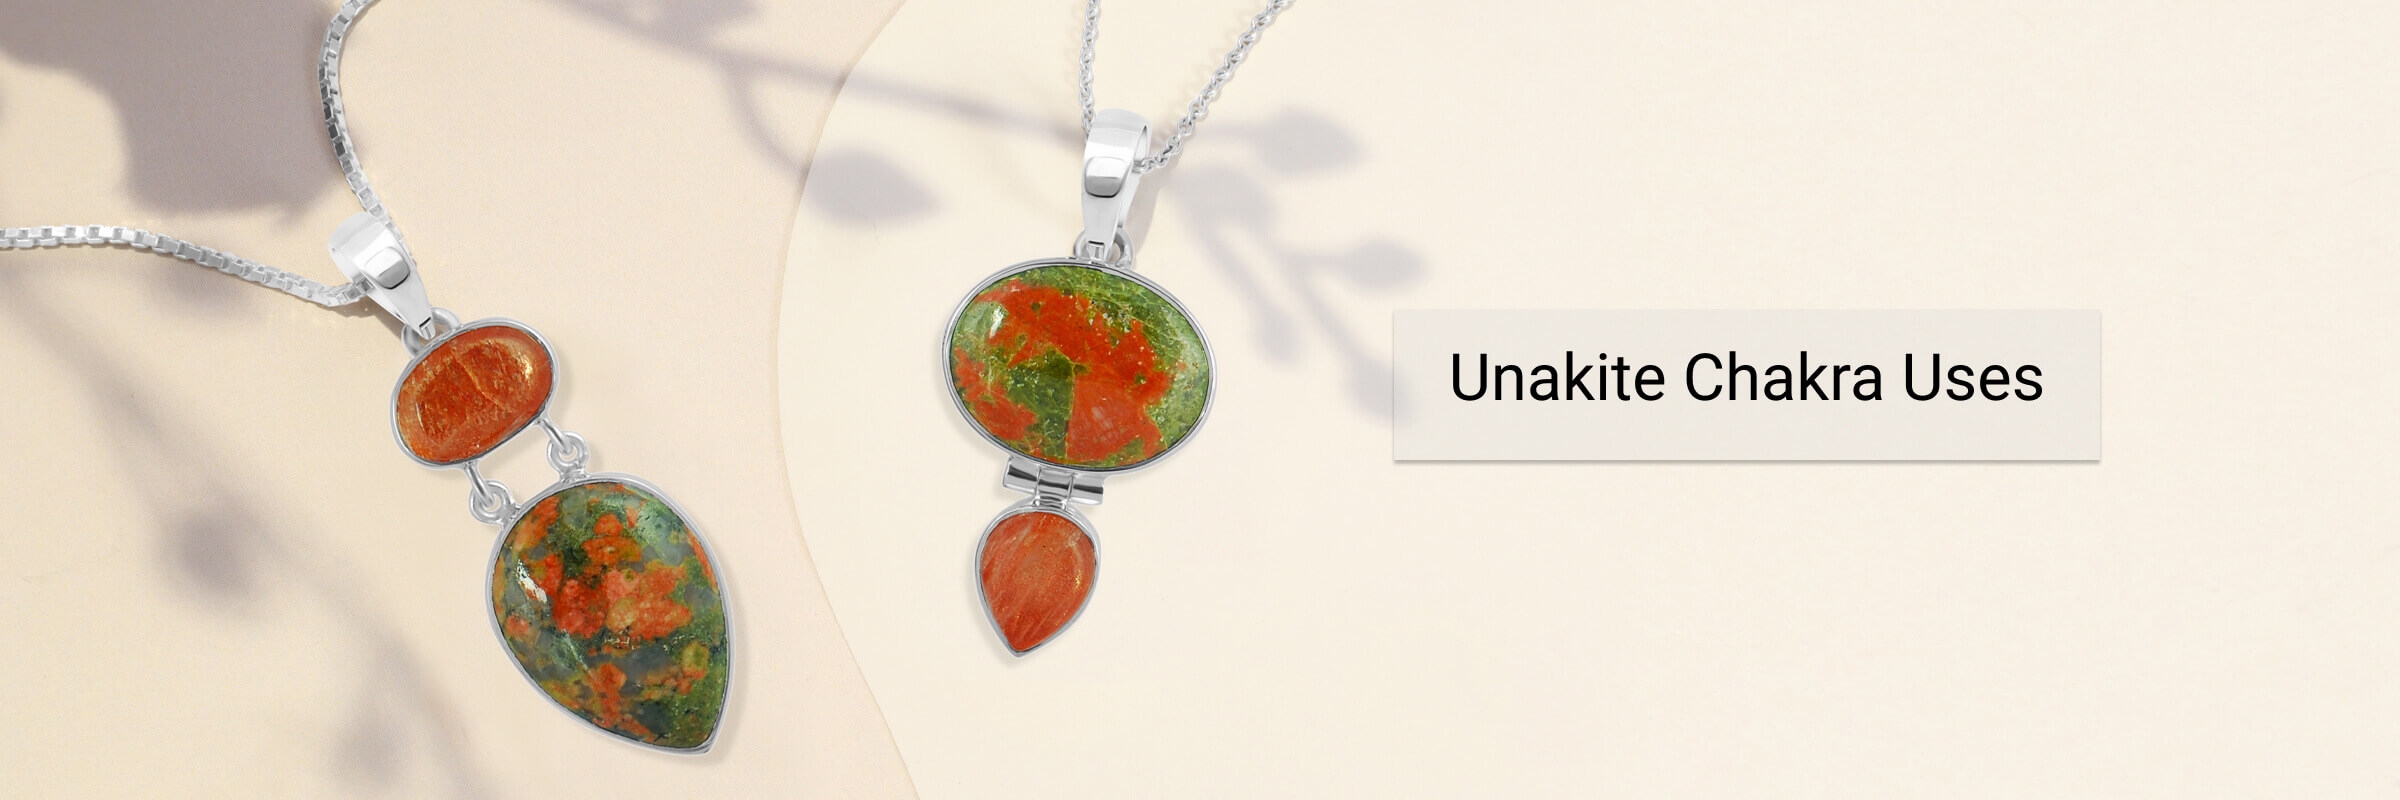 What Chakra Is Unakite Good For?